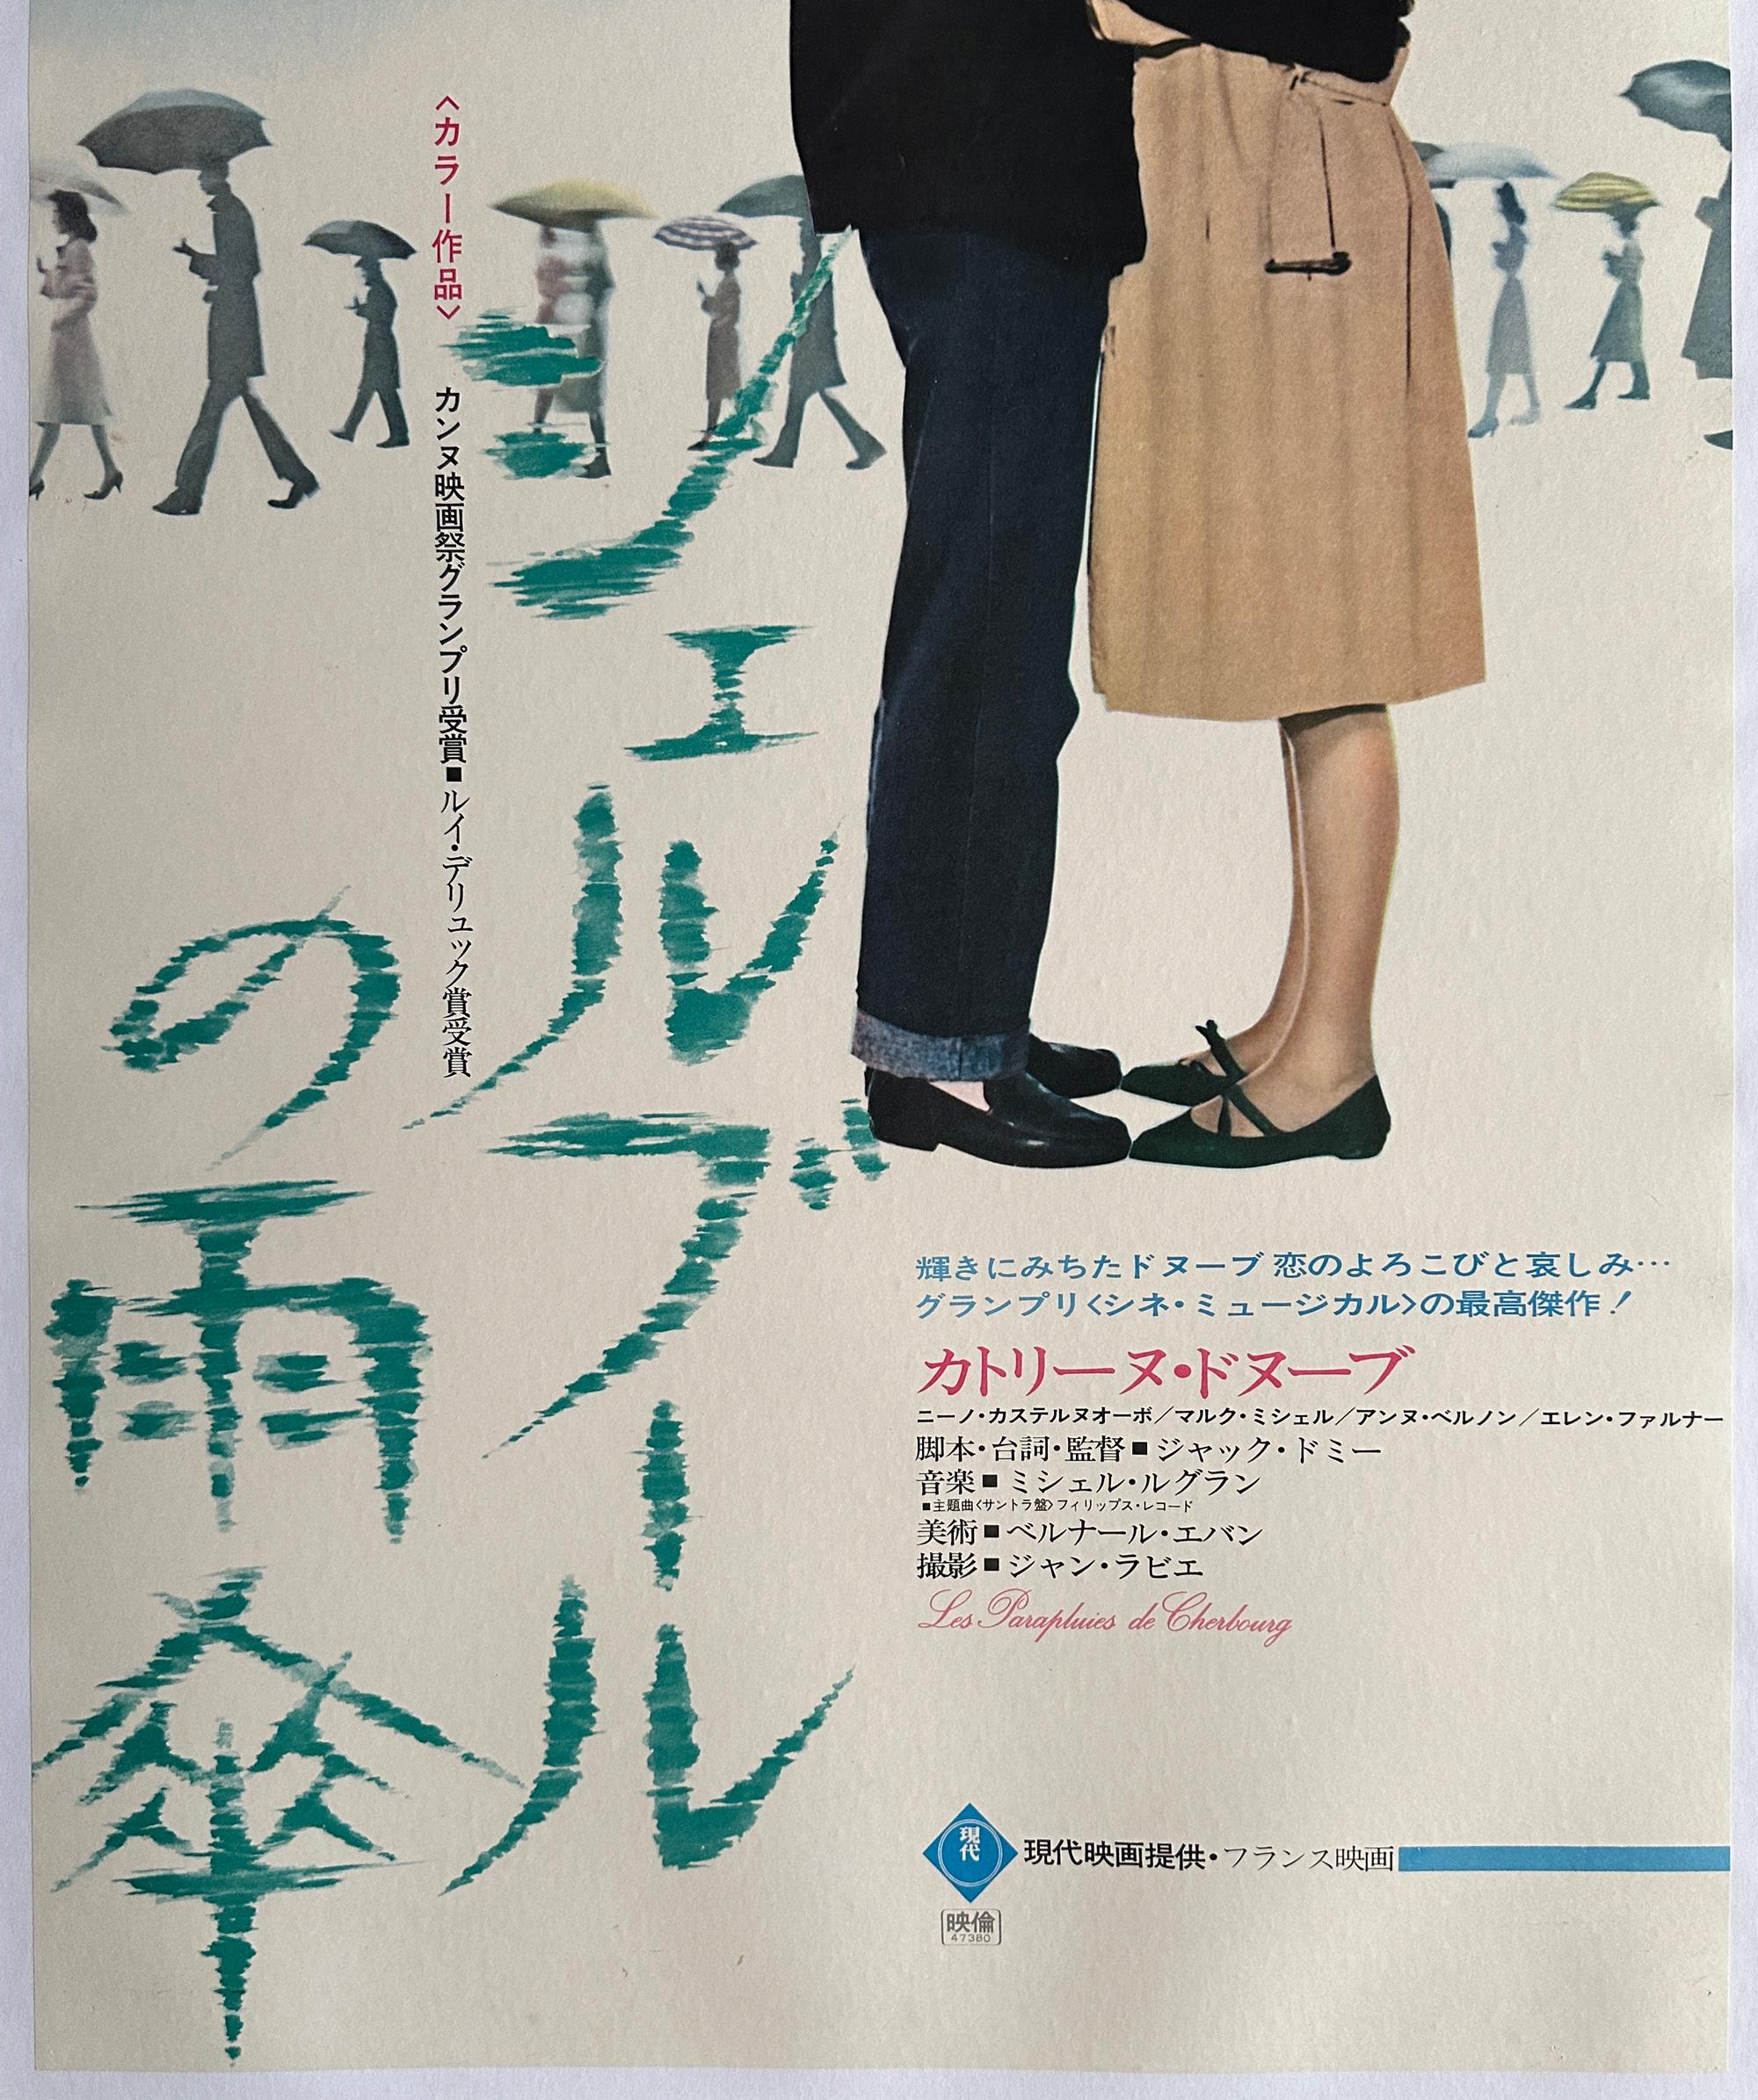 Paper The Umbrellas of Cherbourg R1973 Japanese 2 Sheet Film Poster For Sale